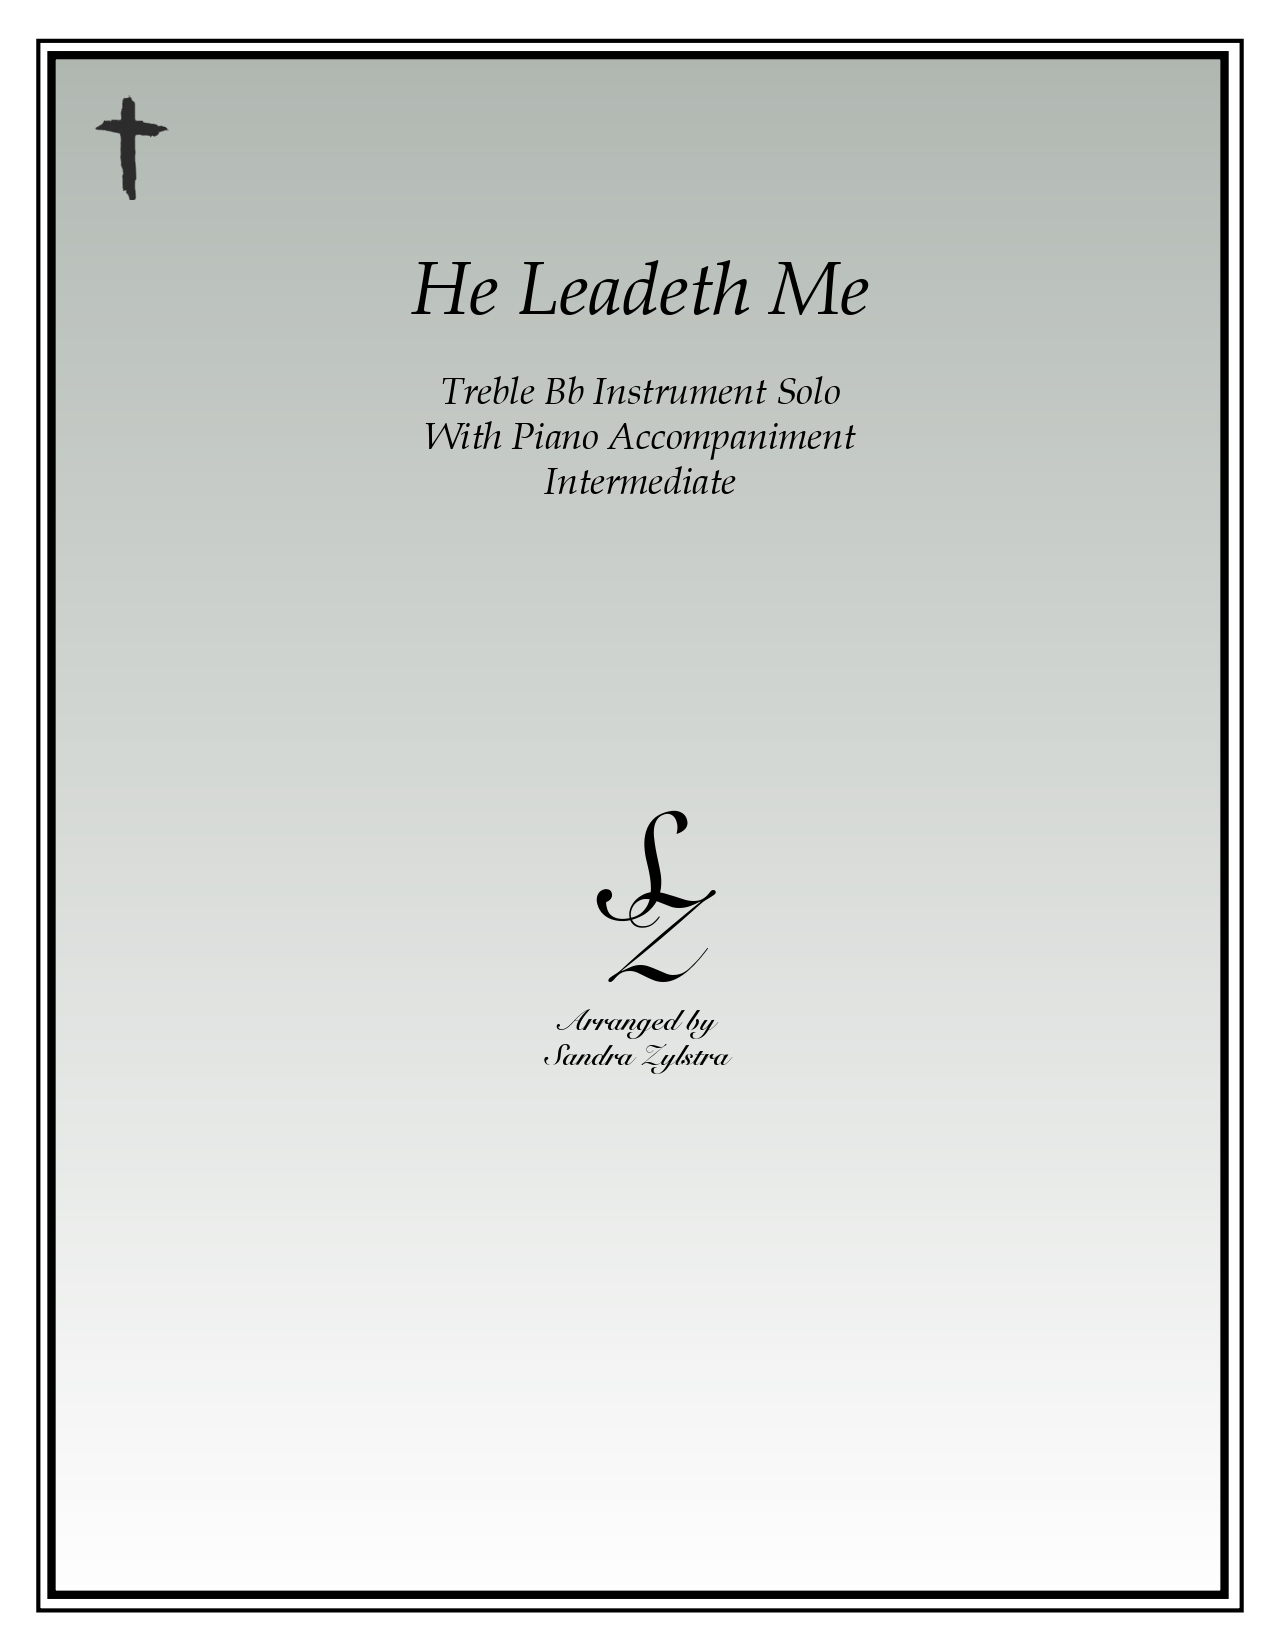 He Leadeth Me Bb instrument solo part cover page 00011